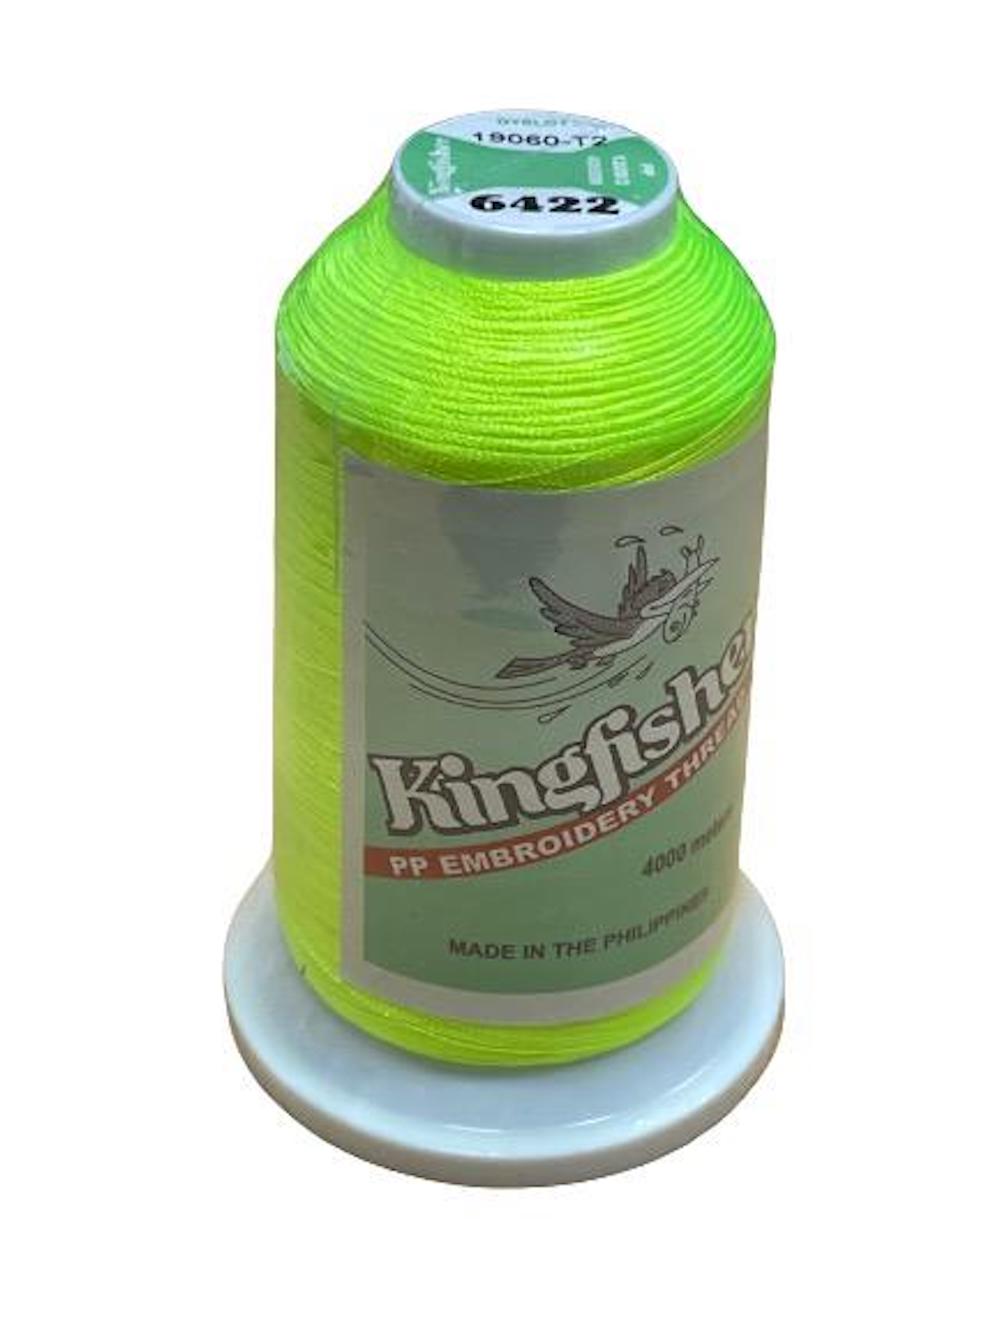 King Fisher Embroidery Thread 4000m 6422 - MY SEWING MALL